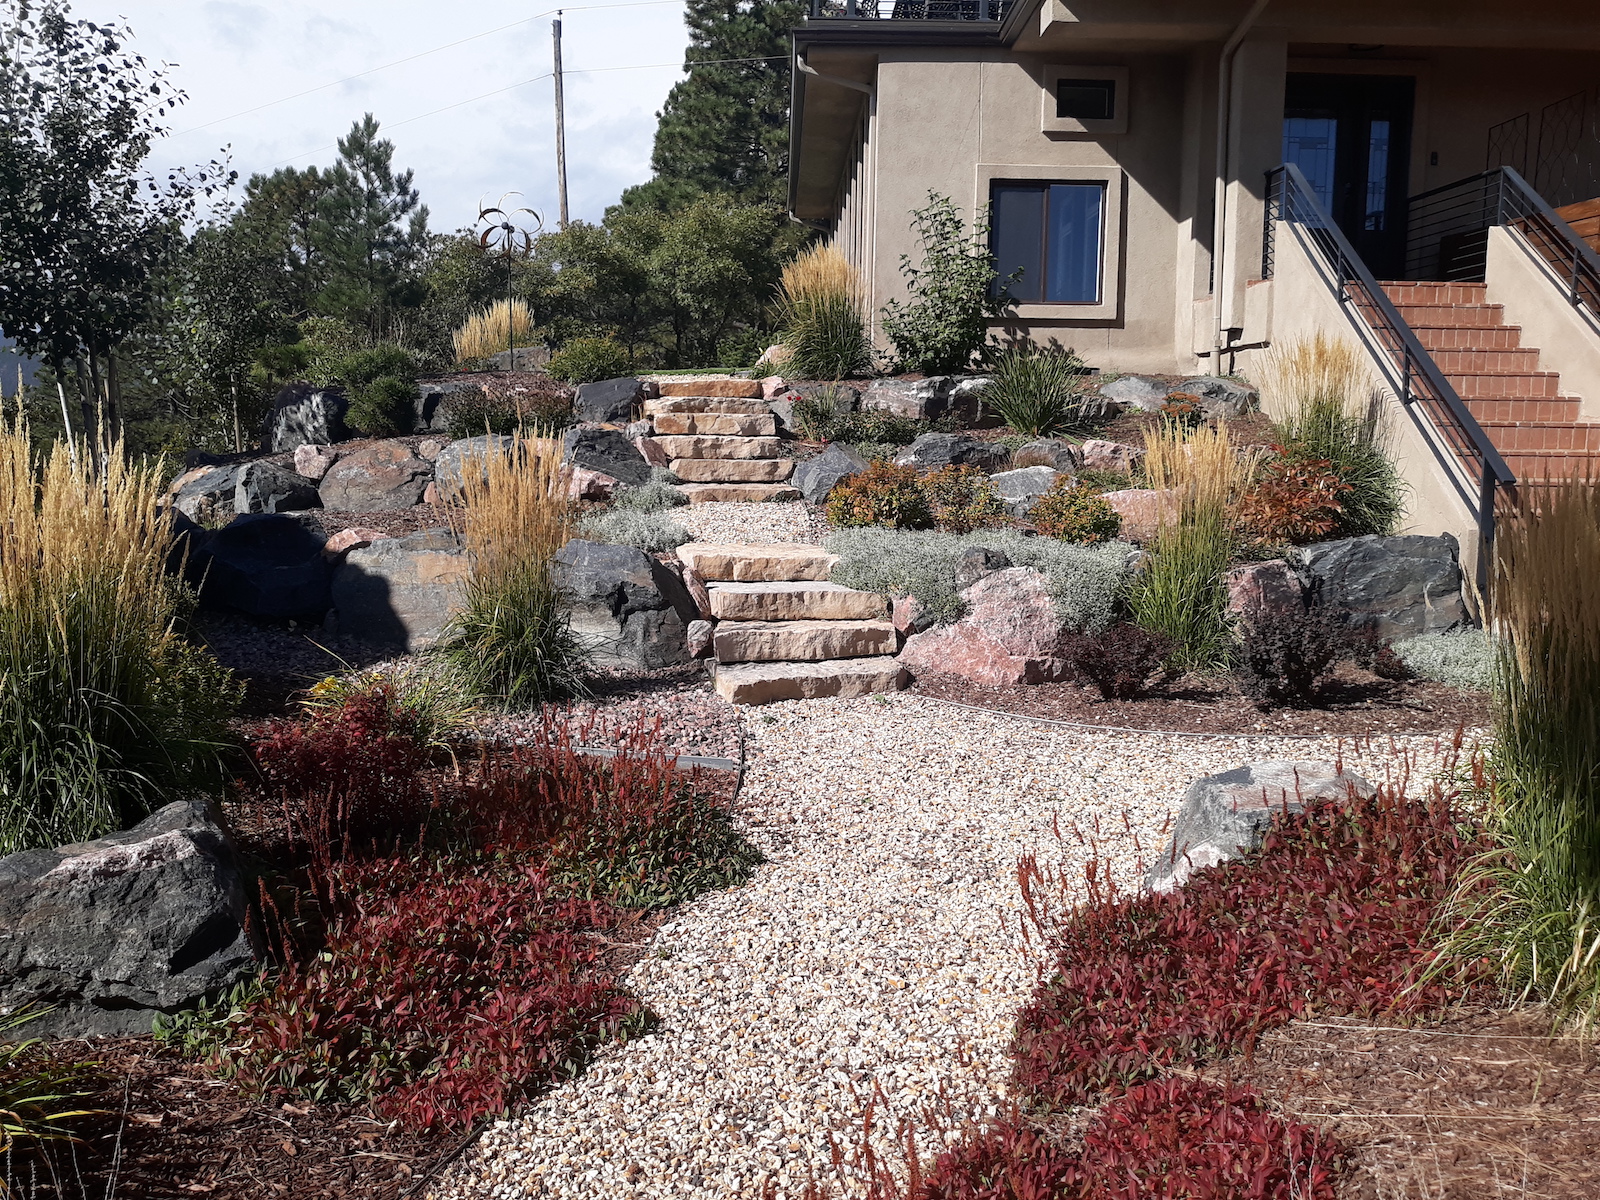 Professional Landscaping Services For Colorado Springs, COg